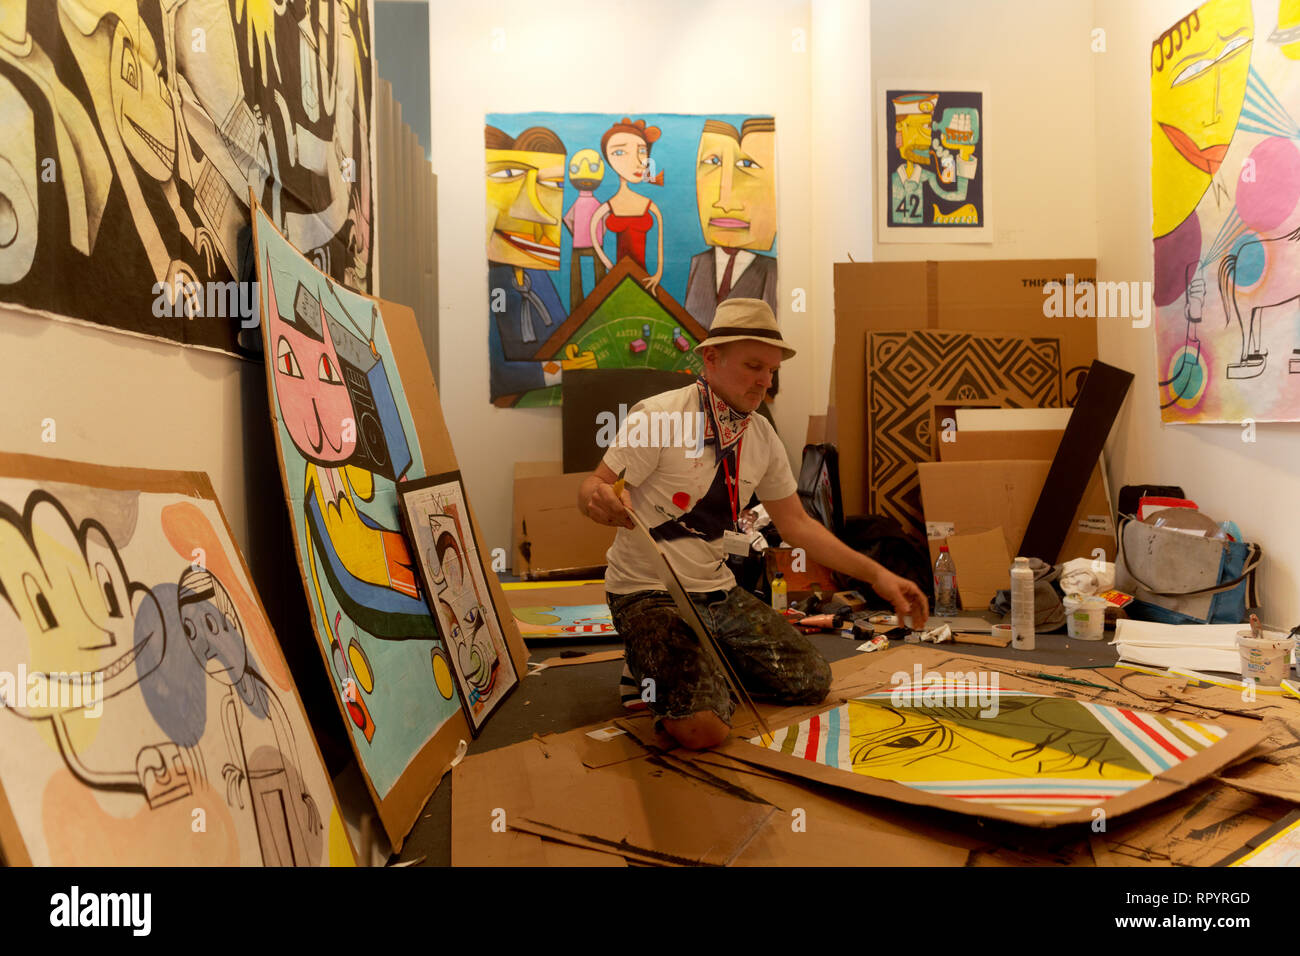 Karlsruhe, Germany. 23rd February, 2019. Jim Avignon, german Pop Art Painter at the 16th ART Karlsruhe exhibition for modern classical and contemporary art 2019 Credit: Michael Liebrecht/Alamy Live News Stock Photo